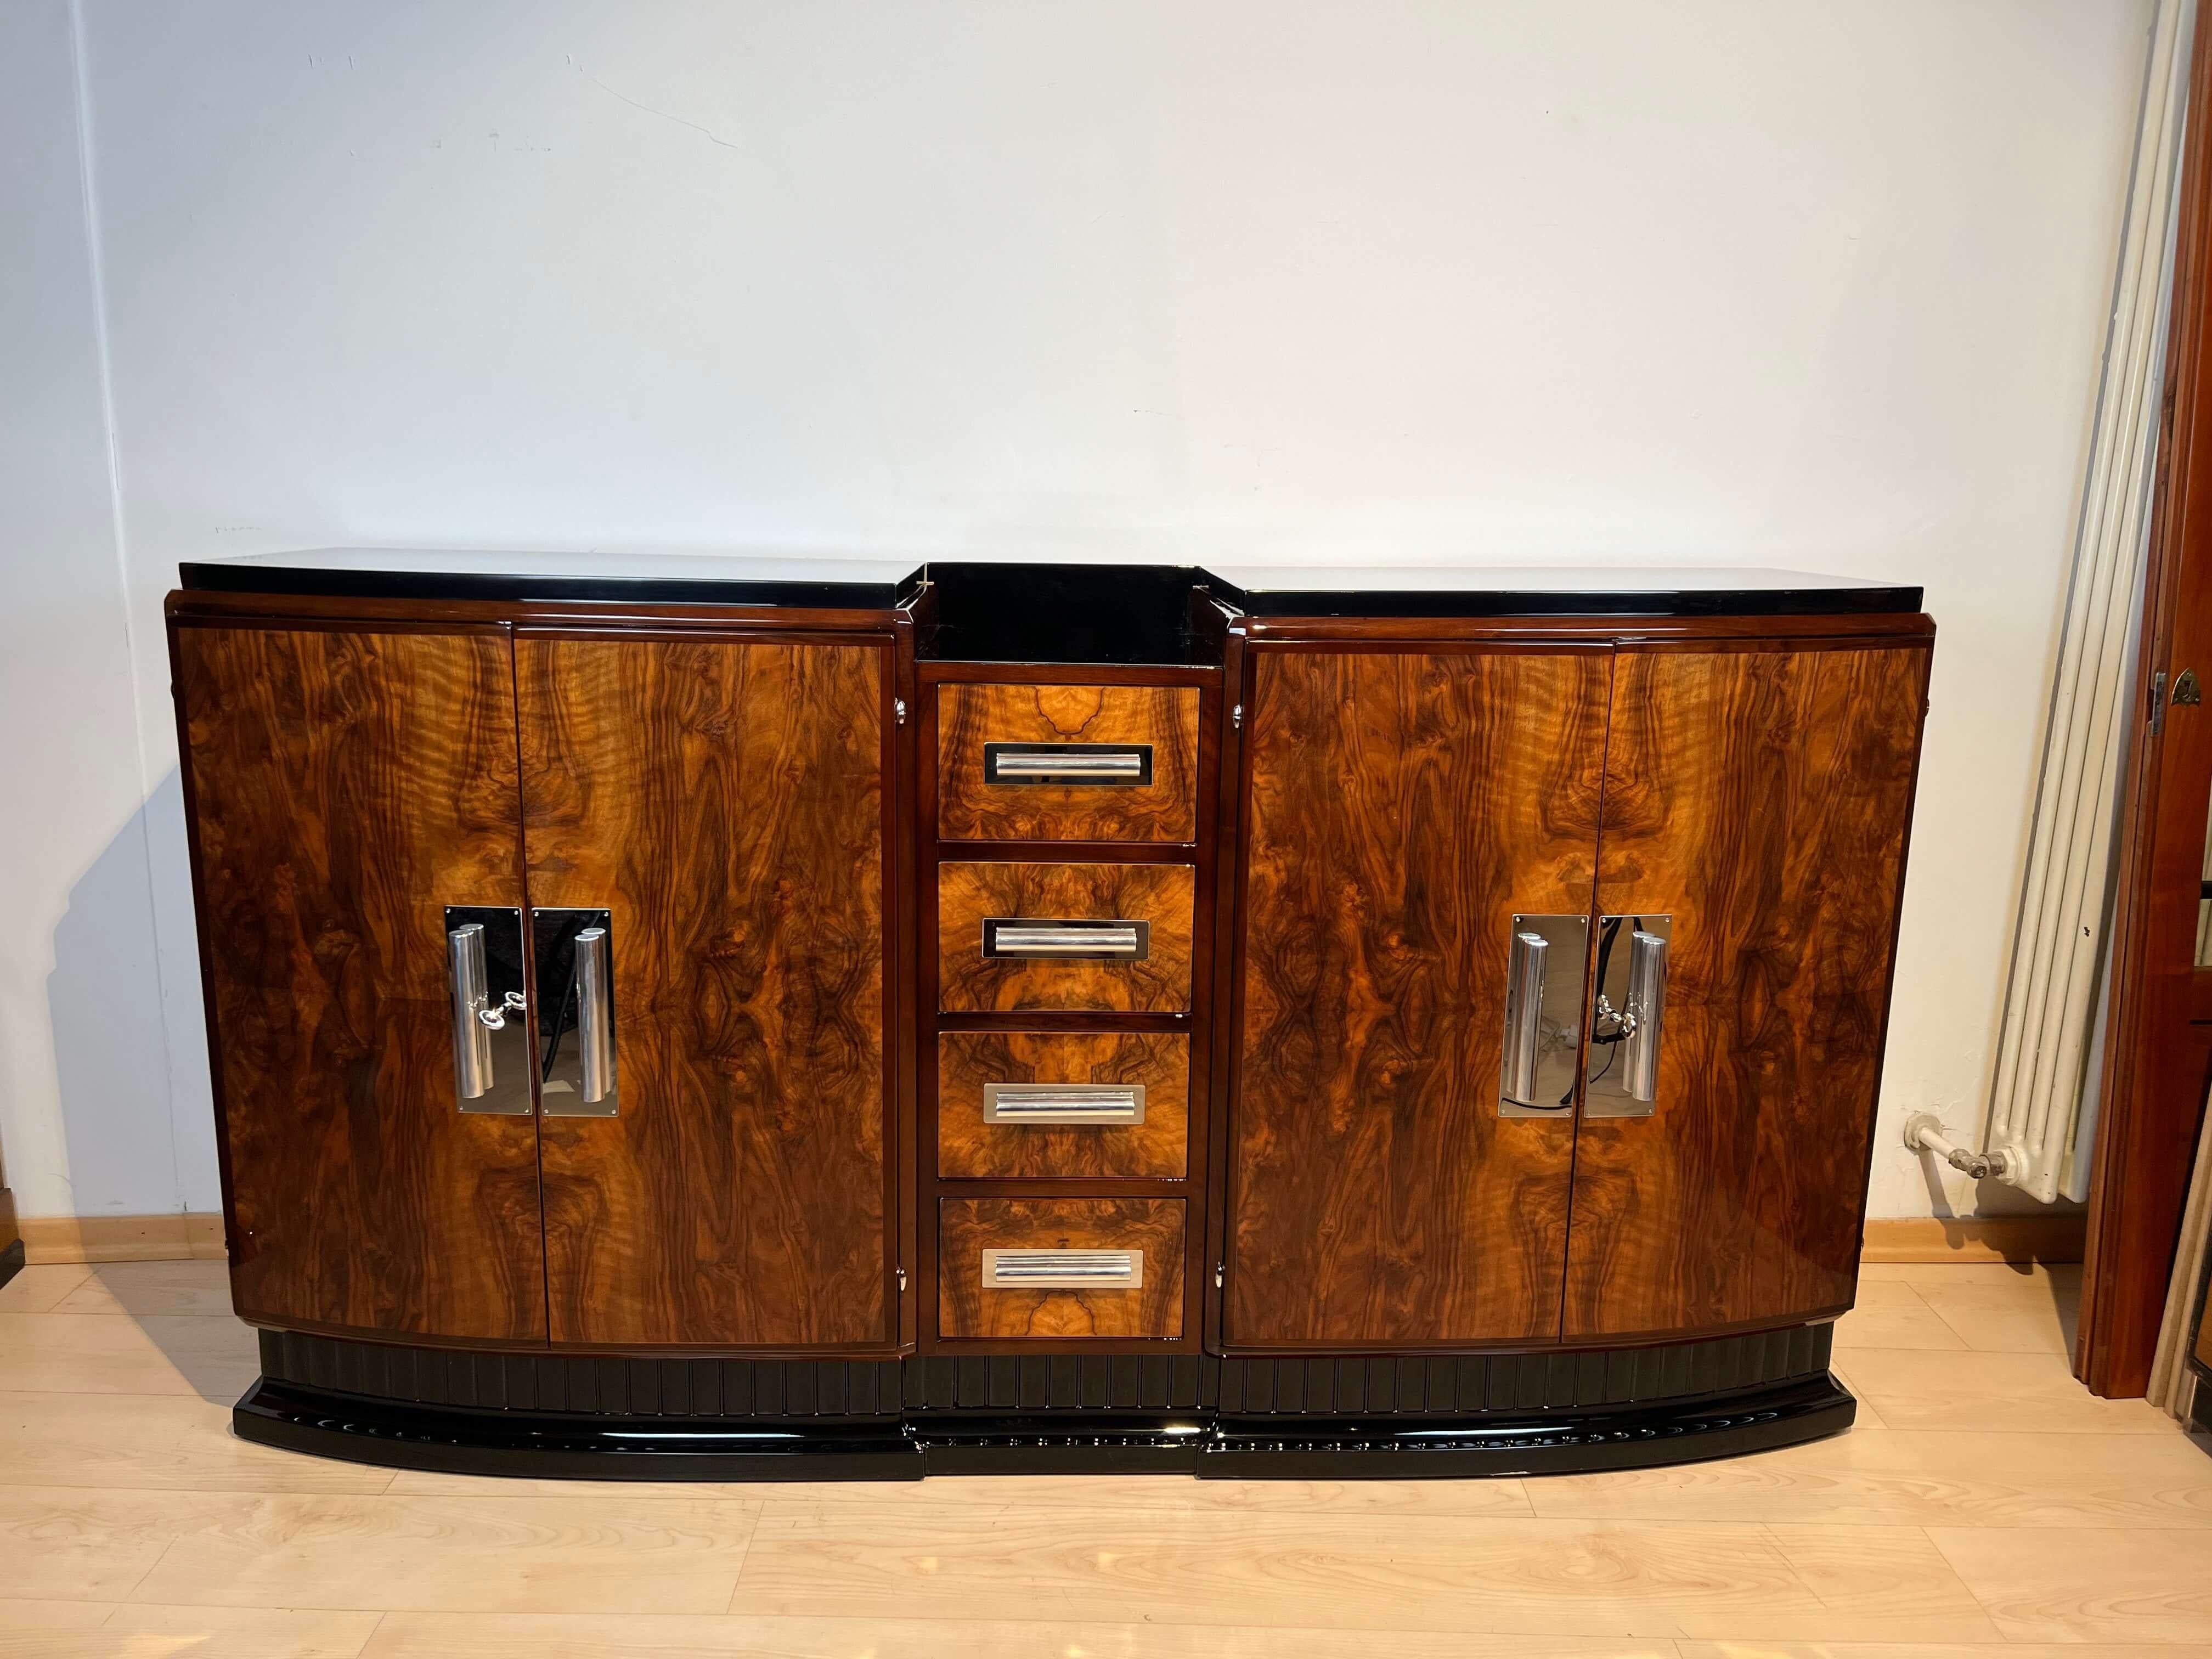 Art Deco Sideboard, Walnut Veneer and Black Lacquer, France circa 1930

Two doors and four drawers. Walnut veneered and solid, partly ebonized. Gorgeous veneer on the drawers and doors. Lacquered high gloss surface.
Above with black lacquered wooden